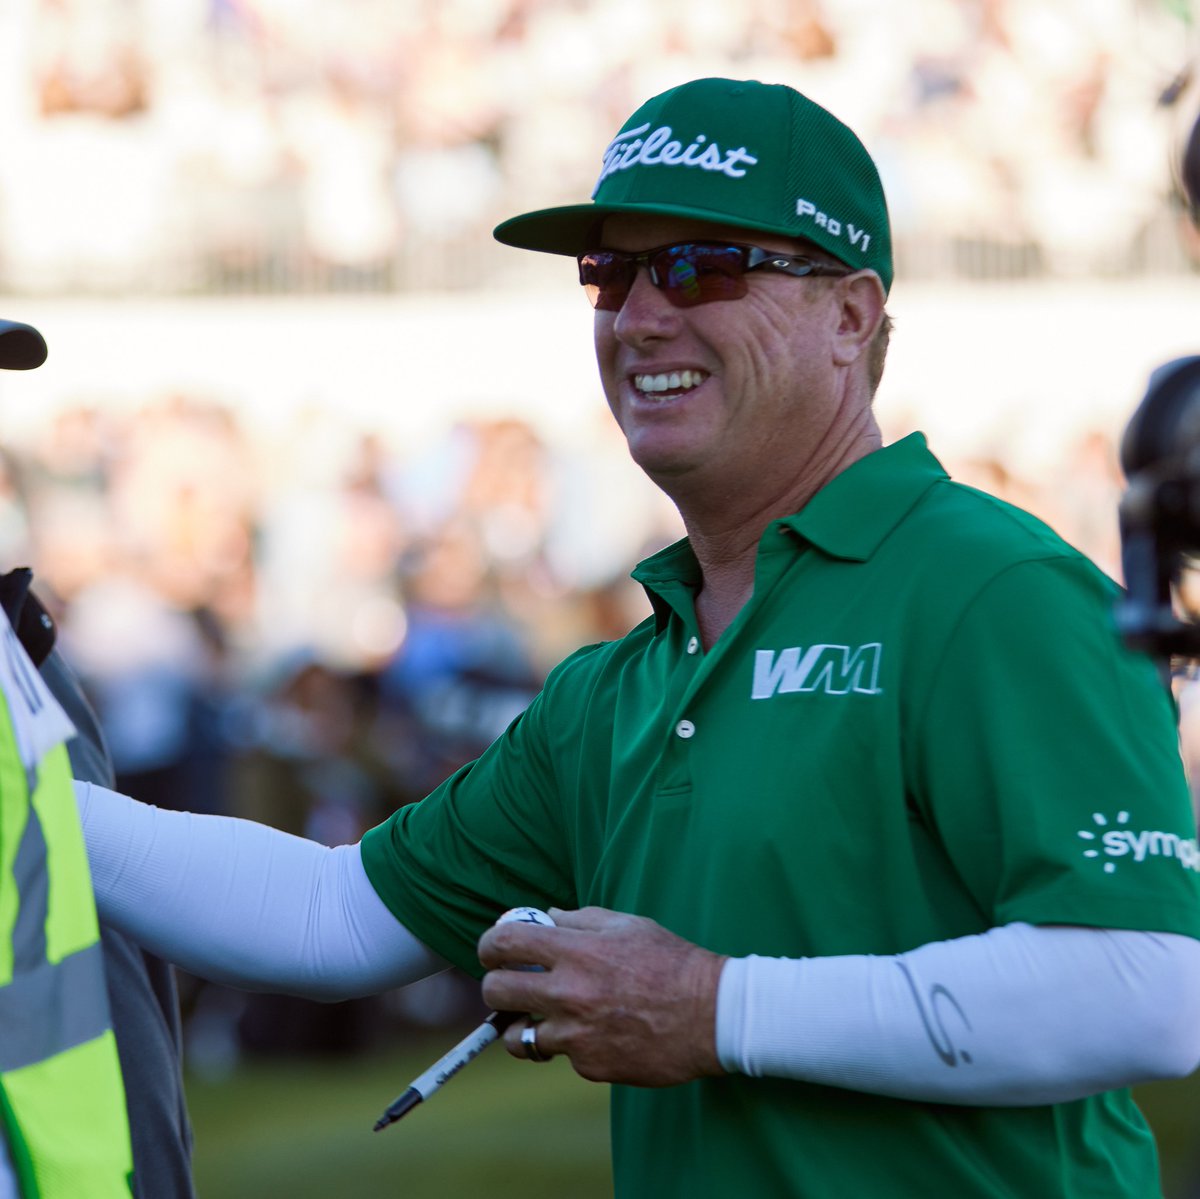 Special shoutout to WM Ambassador Charley Hoffman on his 500th start!